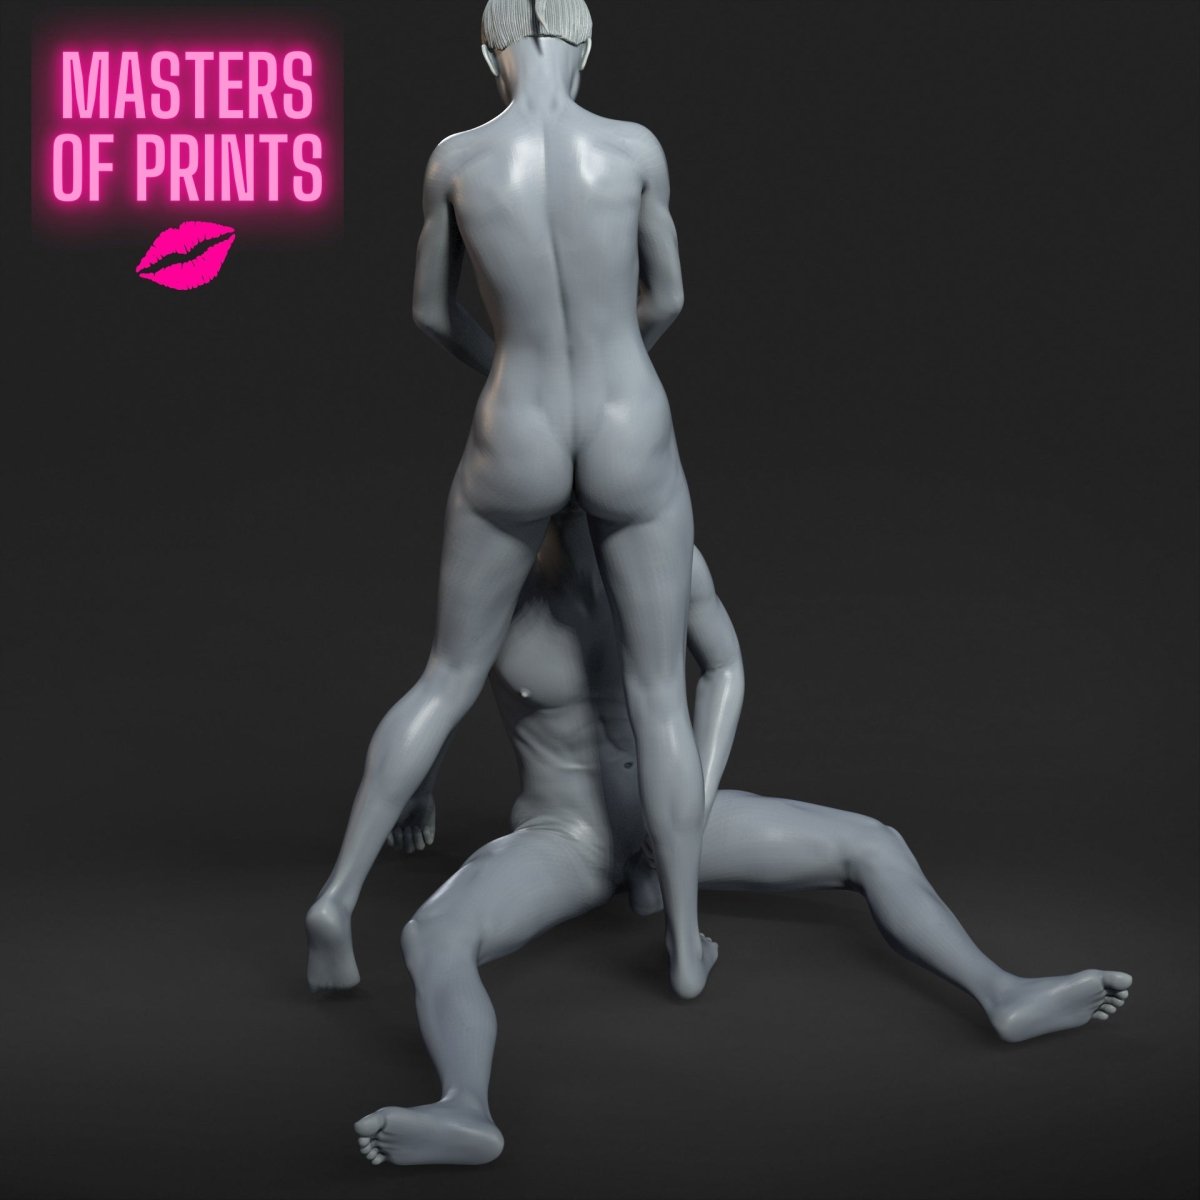 Couple DOMINA 3 Mature 3d Printed miniature FanArt by Masters Of Prints Collectables Statues & Figurines